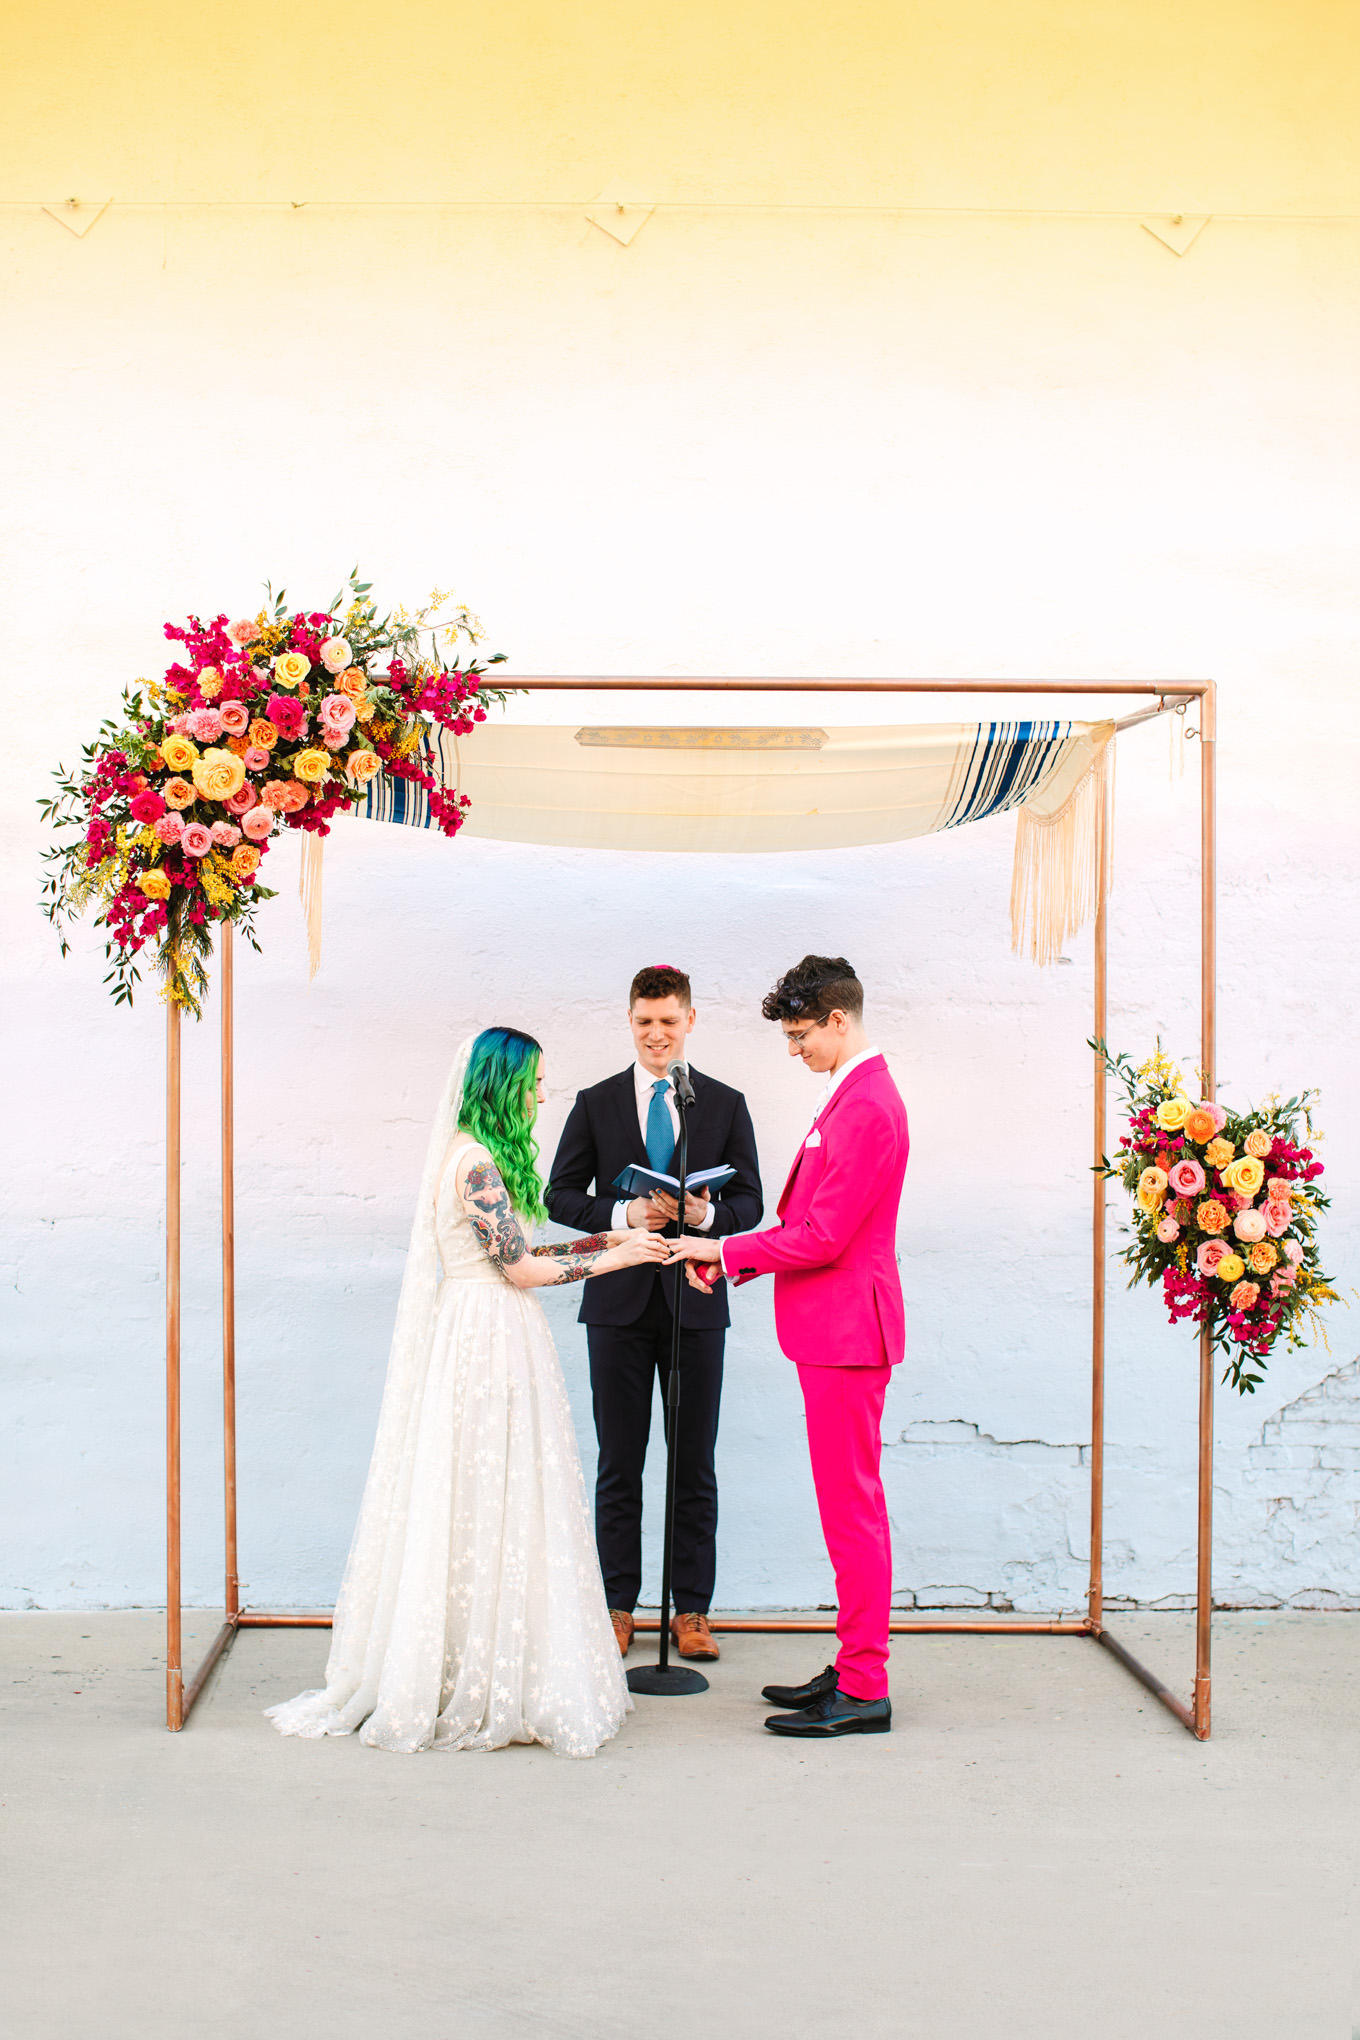 Ceremony ring exchange | Colorful wedding at The Unique Space Los Angeles published in The Knot Magazine | Fresh and colorful photography for fun-loving couples in Southern California | #colorfulwedding #losangeleswedding #weddingphotography #uniquespace Source: Mary Costa Photography | Los Angeles